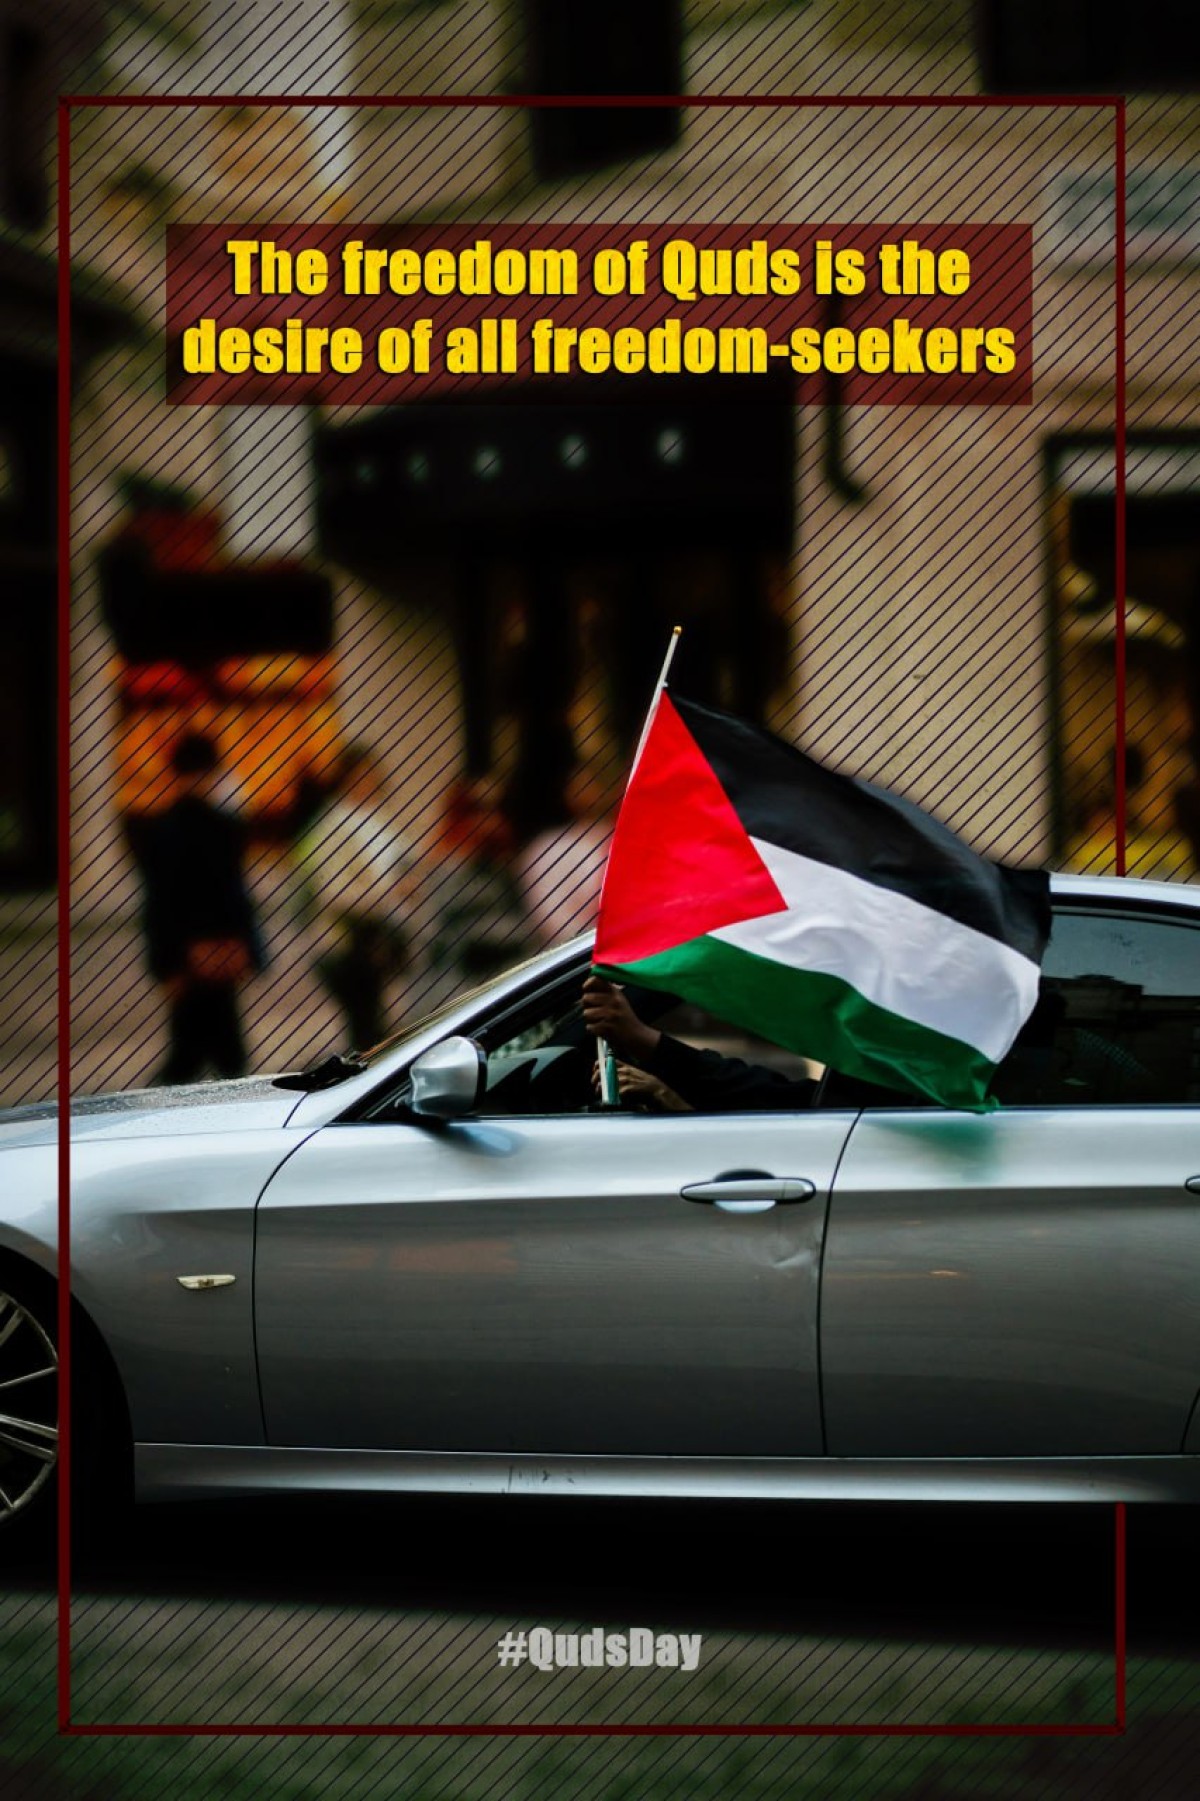 The freedom of Quds is the desire of all freedom-seekers